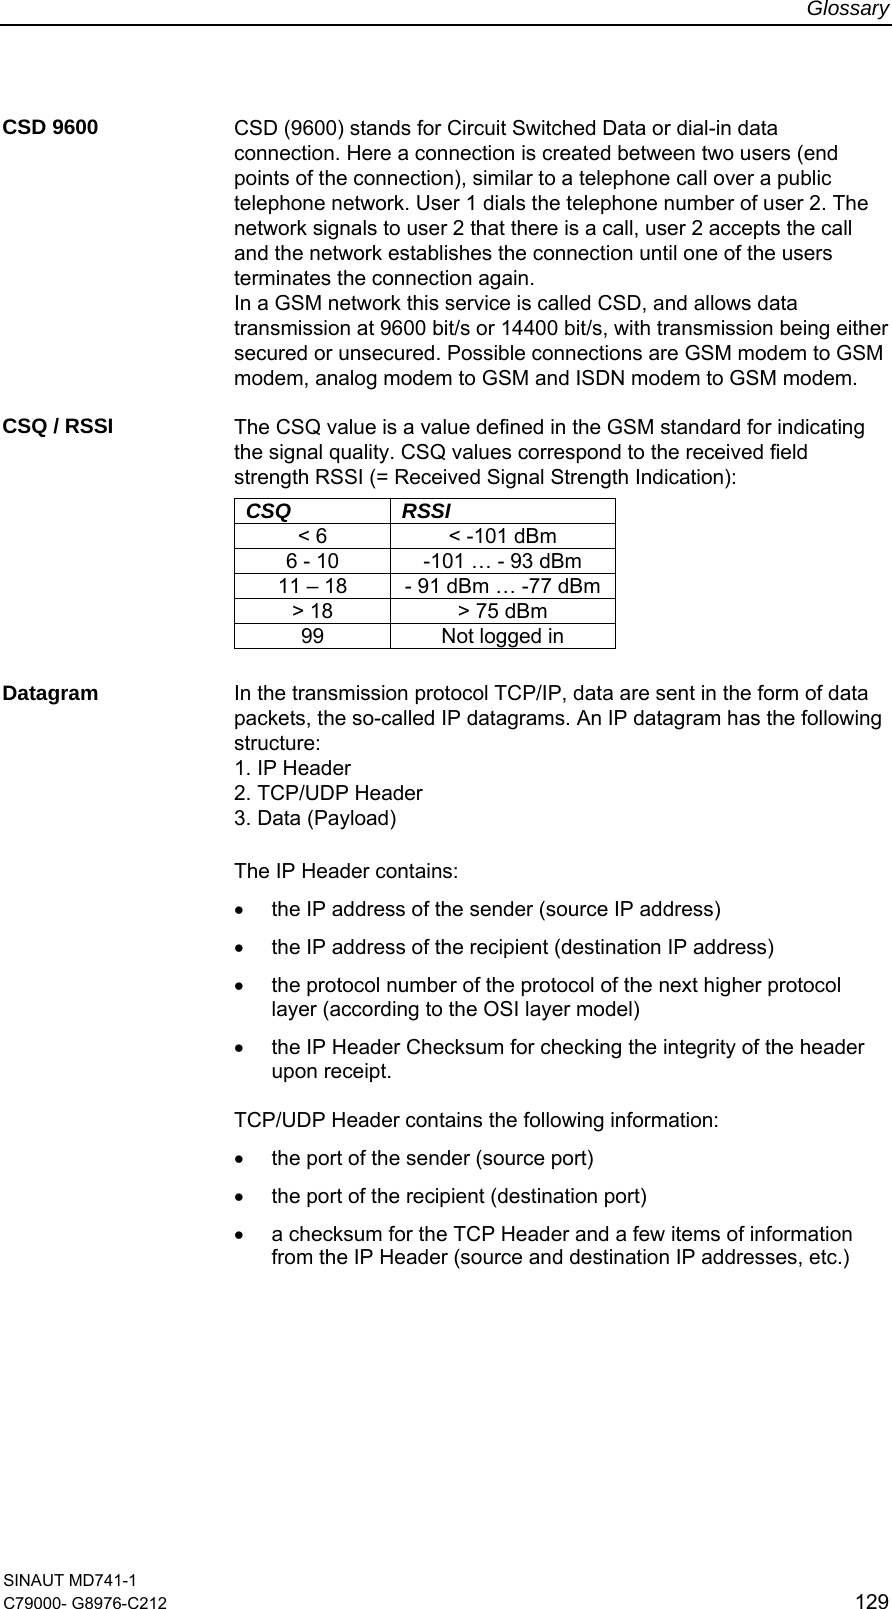 Glossary SINAUT MD741-1 C79000- G8976-C212  129  CSD 9600  CSD (9600) stands for Circuit Switched Data or dial-in data connection. Here a connection is created between two users (end points of the connection), similar to a telephone call over a public telephone network. User 1 dials the telephone number of user 2. The network signals to user 2 that there is a call, user 2 accepts the call and the network establishes the connection until one of the users terminates the connection again. In a GSM network this service is called CSD, and allows data transmission at 9600 bit/s or 14400 bit/s, with transmission being either secured or unsecured. Possible connections are GSM modem to GSM modem, analog modem to GSM and ISDN modem to GSM modem.  CSQ / RSSI  The CSQ value is a value defined in the GSM standard for indicating the signal quality. CSQ values correspond to the received field strength RSSI (= Received Signal Strength Indication):        CSQ RSSI &lt; 6  &lt; -101 dBm 6 - 10  -101 … - 93 dBm 11 – 18  - 91 dBm … -77 dBm &gt; 18  &gt; 75 dBm 99  Not logged in  Datagram  In the transmission protocol TCP/IP, data are sent in the form of data packets, the so-called IP datagrams. An IP datagram has the following structure: 1. IP Header 2. TCP/UDP Header 3. Data (Payload)  The IP Header contains: •  the IP address of the sender (source IP address) •  the IP address of the recipient (destination IP address) •  the protocol number of the protocol of the next higher protocol layer (according to the OSI layer model) •  the IP Header Checksum for checking the integrity of the header upon receipt.  TCP/UDP Header contains the following information: •  the port of the sender (source port) •  the port of the recipient (destination port) •  a checksum for the TCP Header and a few items of information from the IP Header (source and destination IP addresses, etc.)  